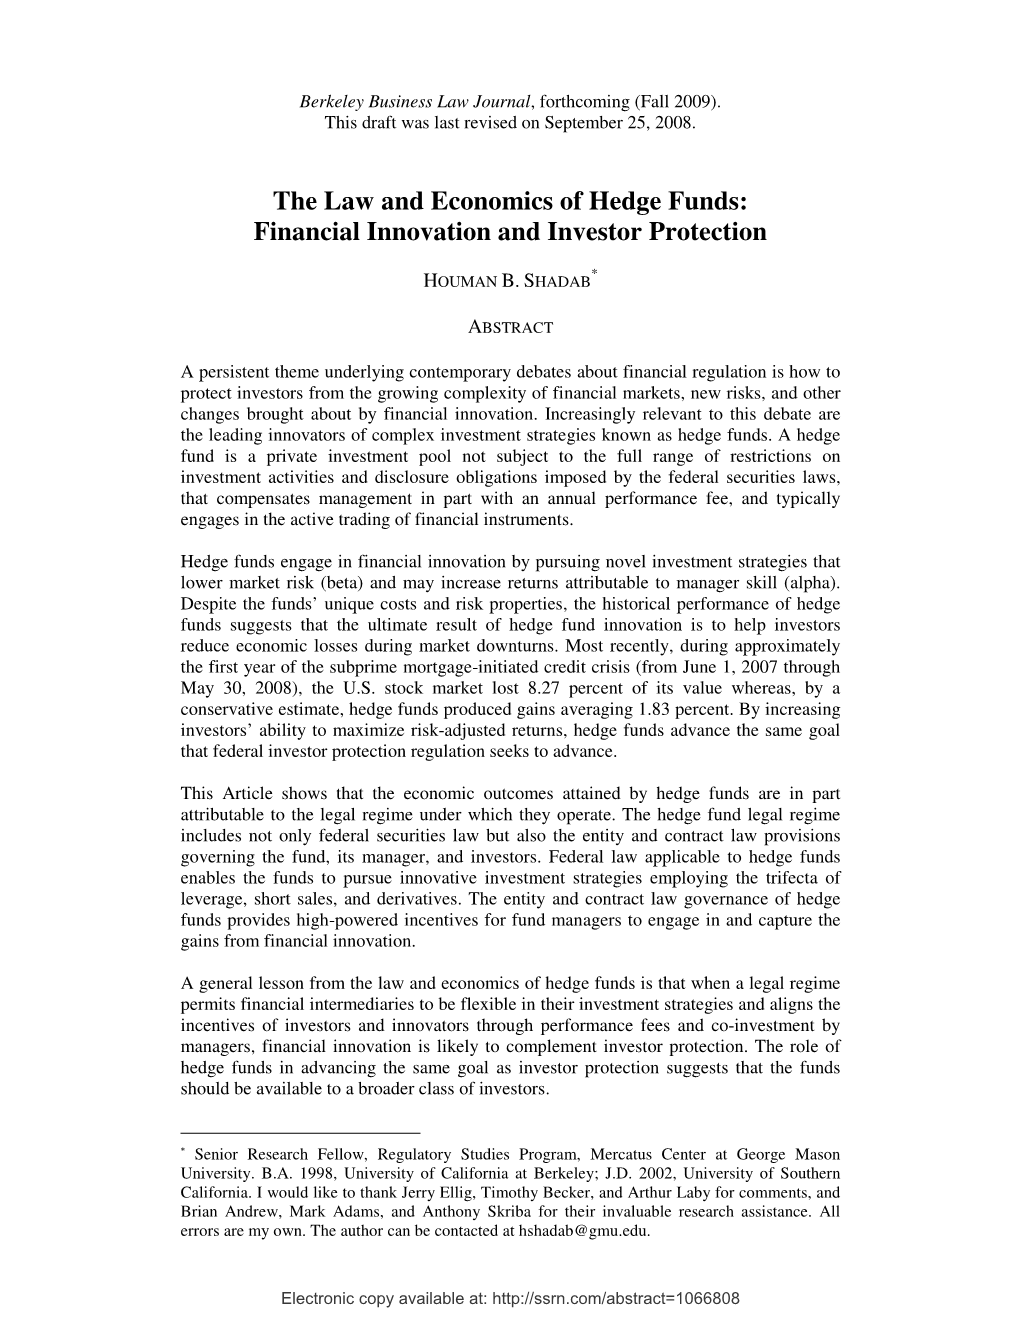 The Law and Economics of Hedge Funds: Financial Innovation and Investor Protection